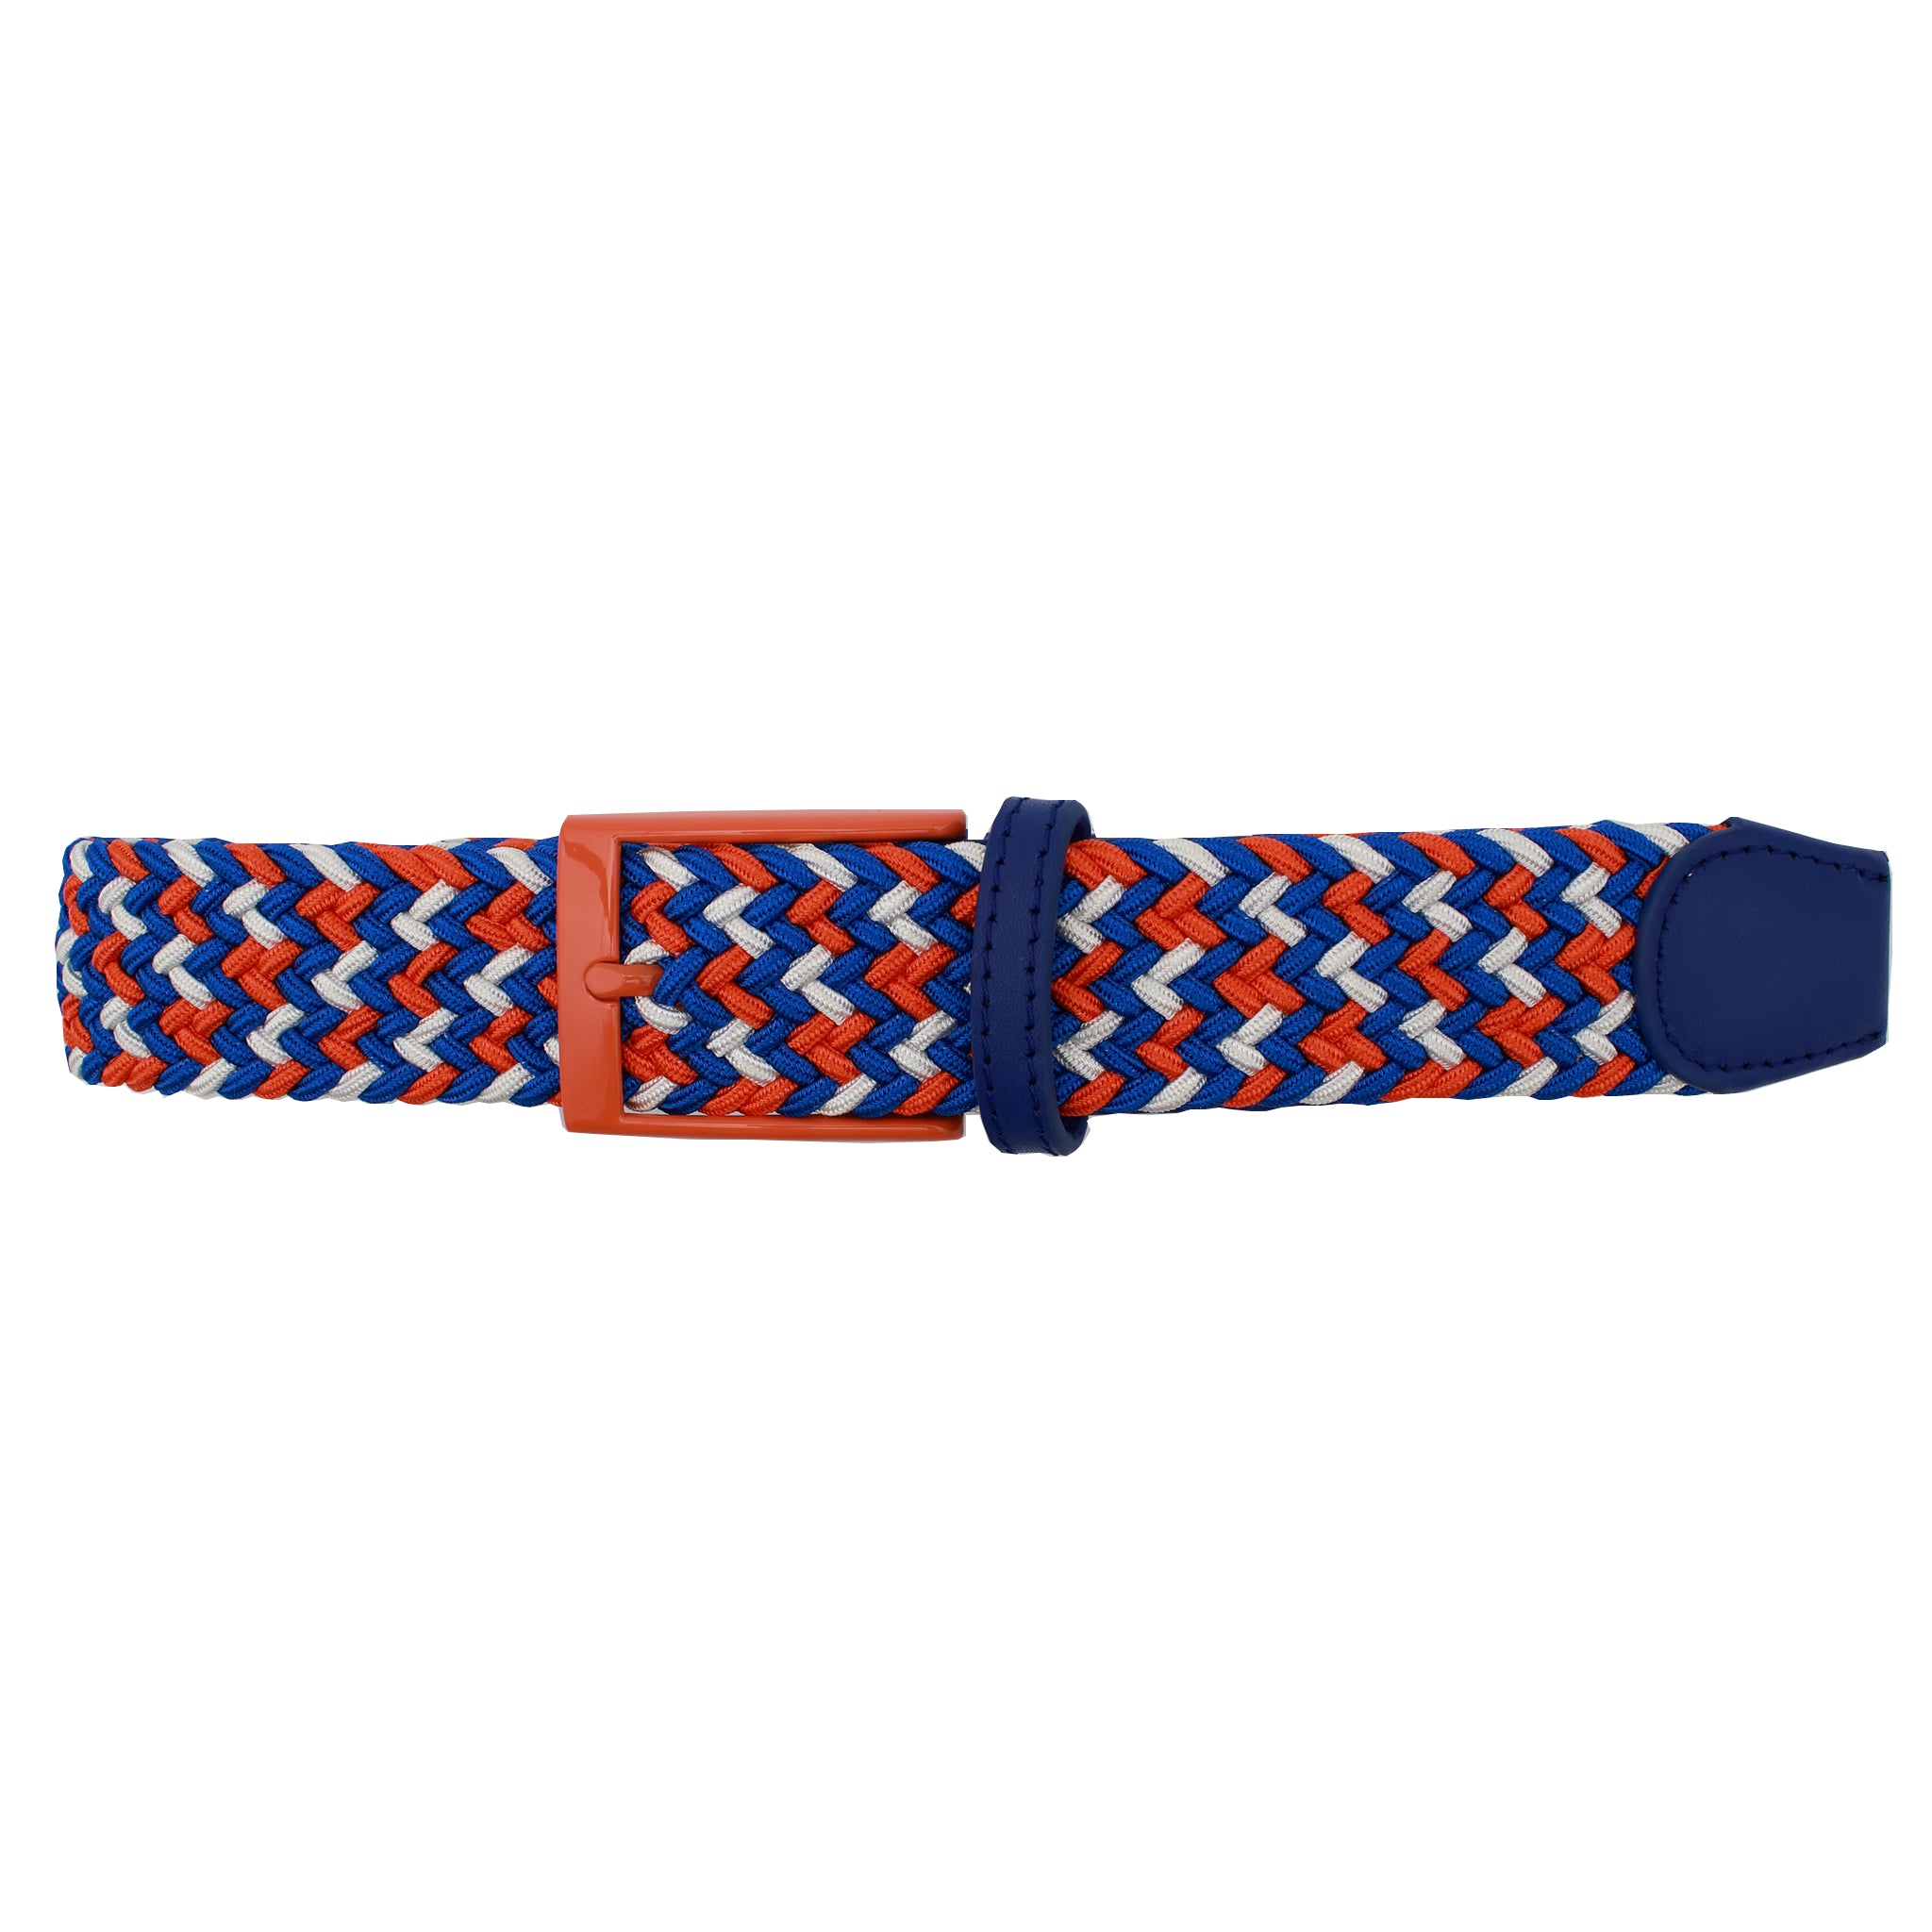 Woven Elastic Blue Belt with Sky-Blue and Beige Pattern